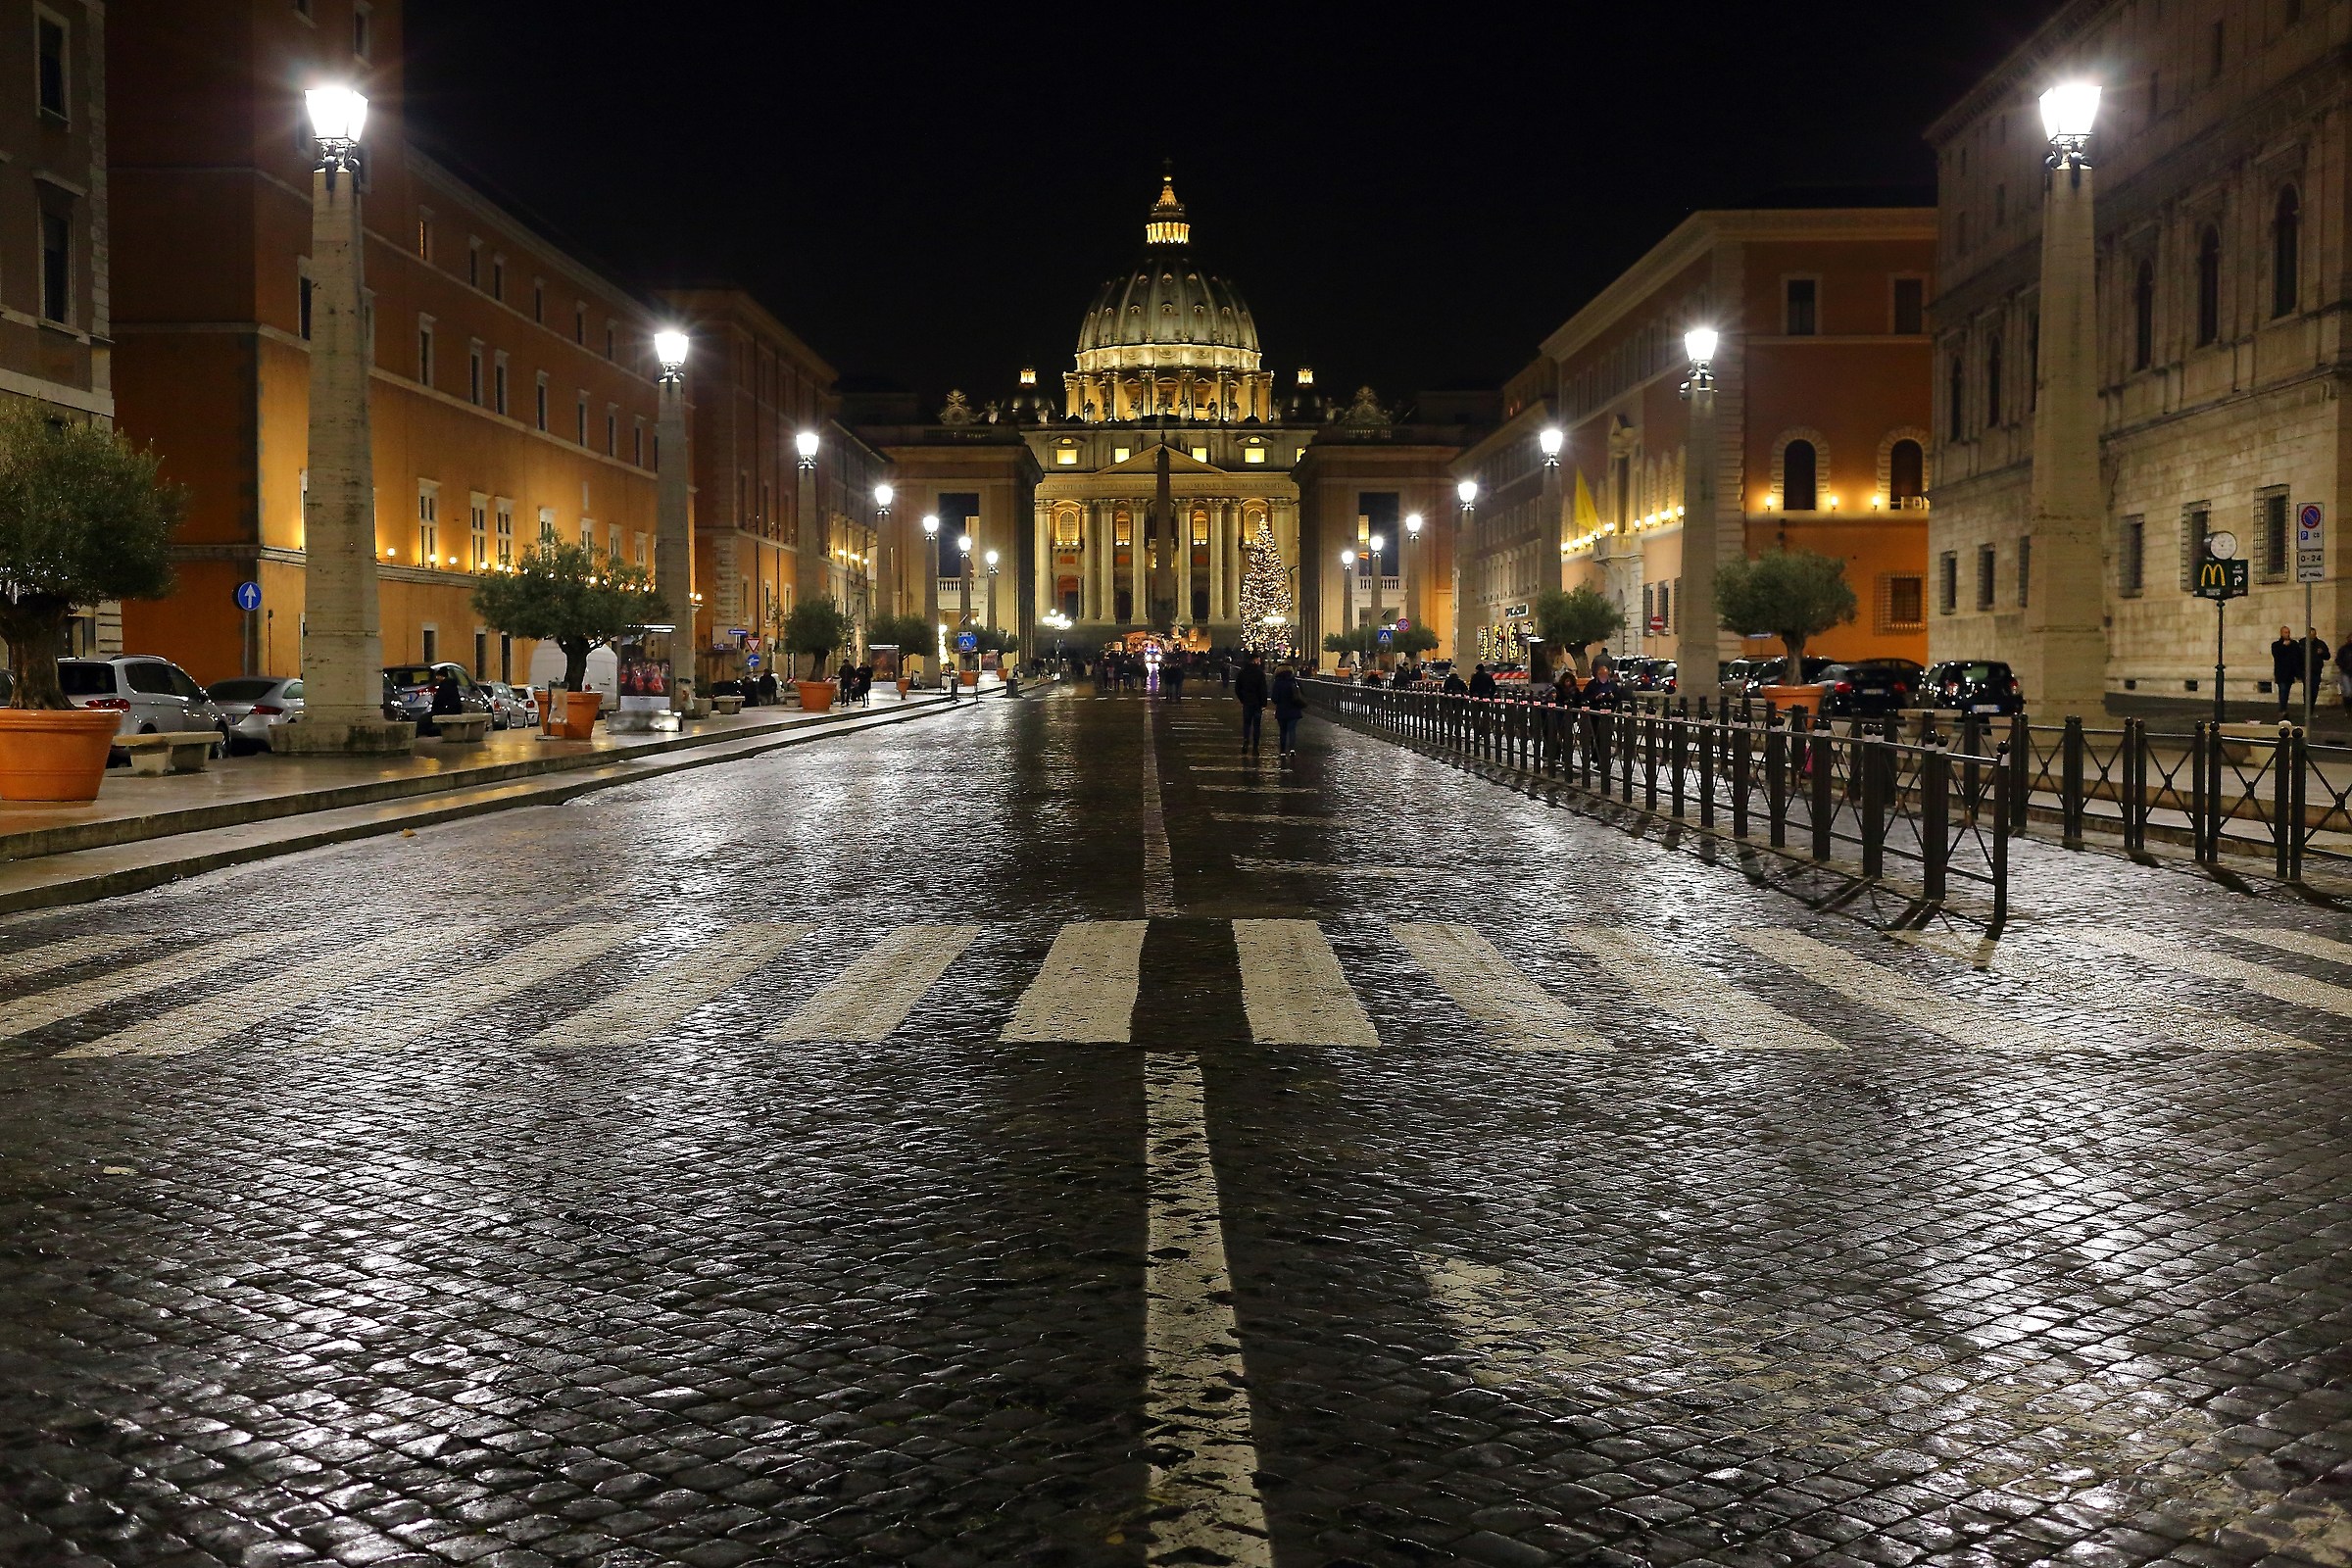 St. Peter at night...